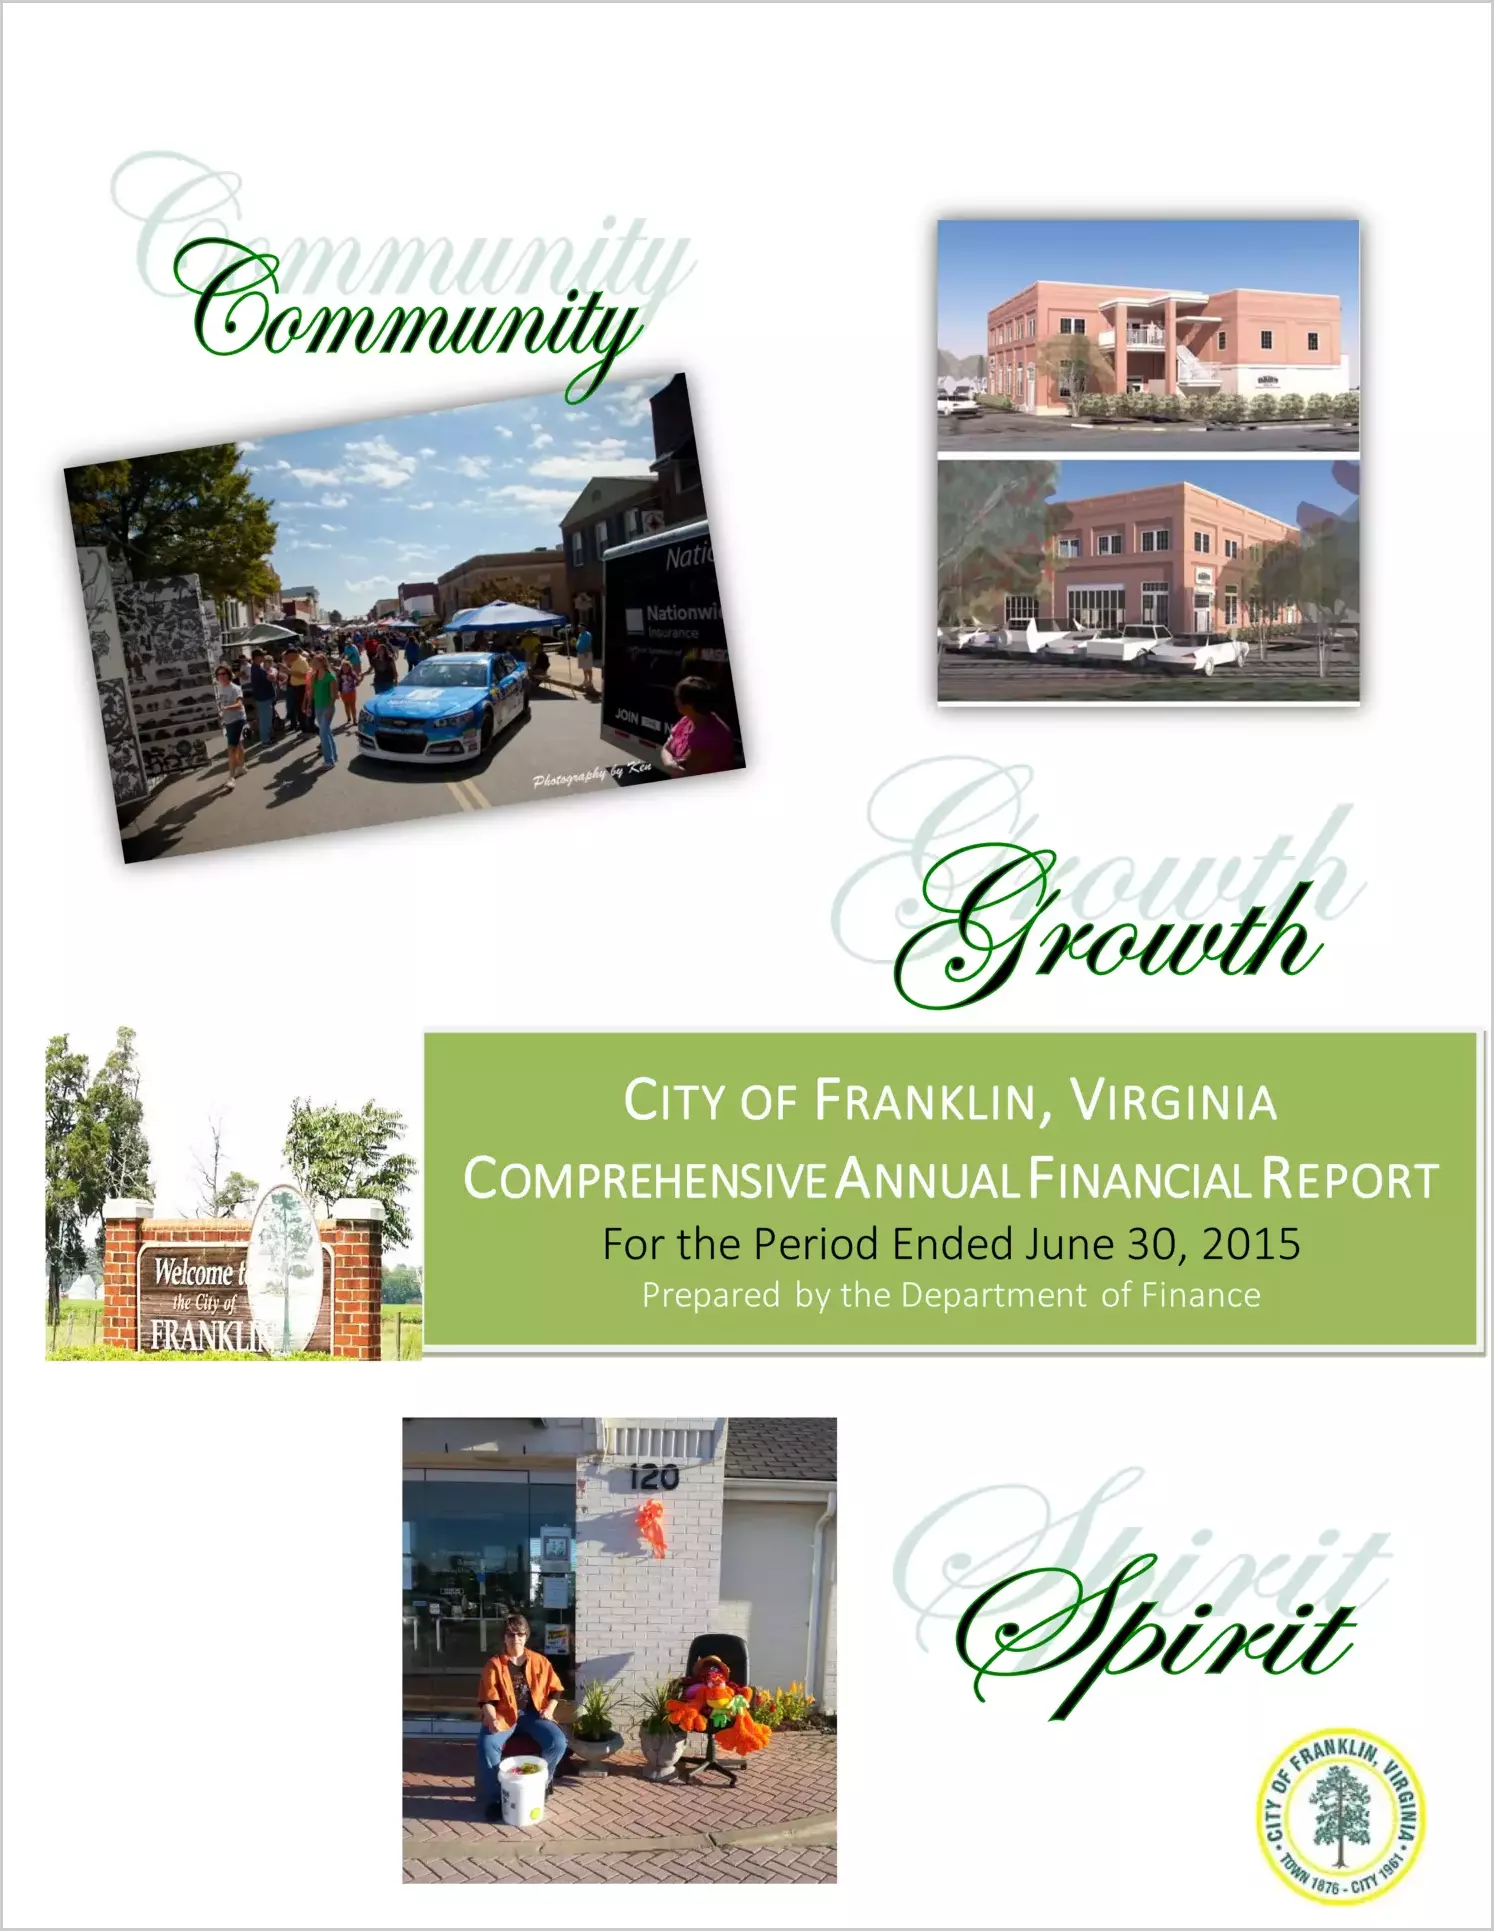 2015 Annual Financial Report for City of Franklin